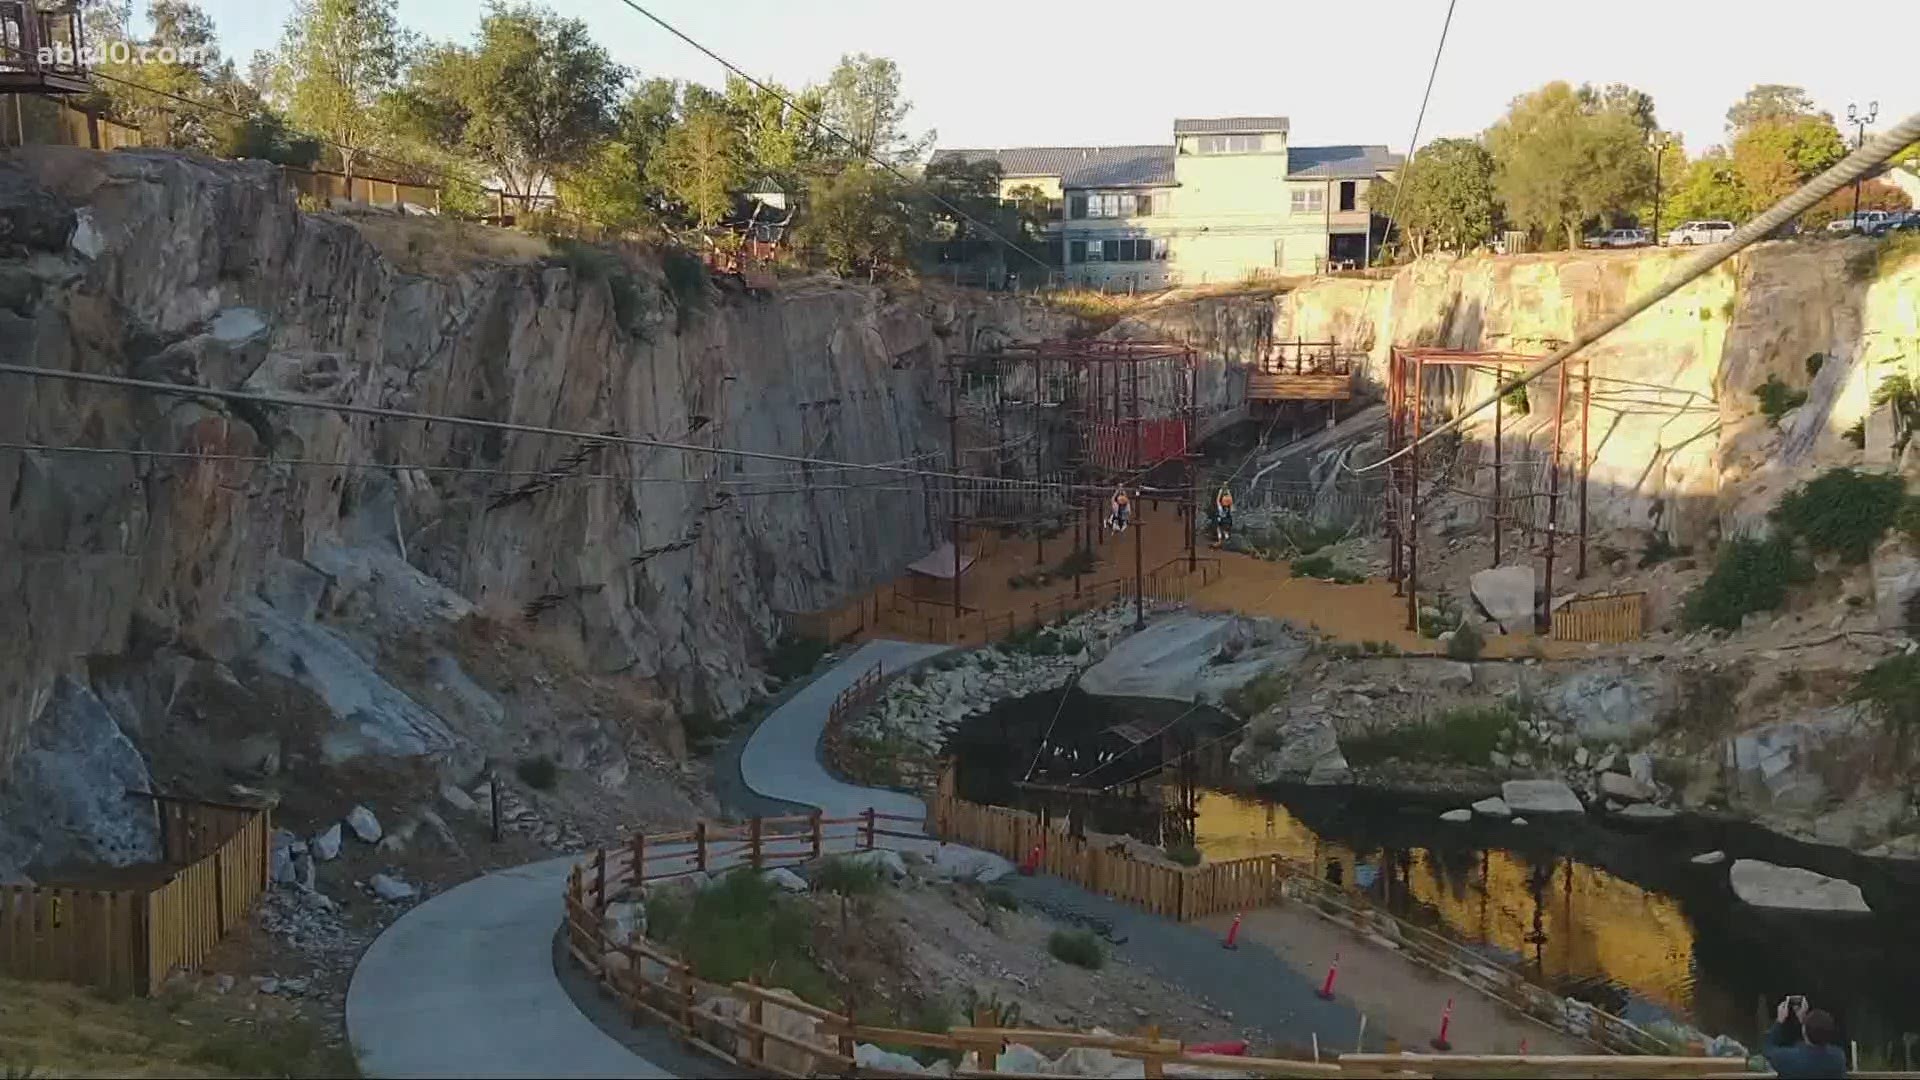 Quarry Park in Rocklin is reopening for business as California moves into Phase 3 of its reopening plan. Here are some of the safety measures being implemented.